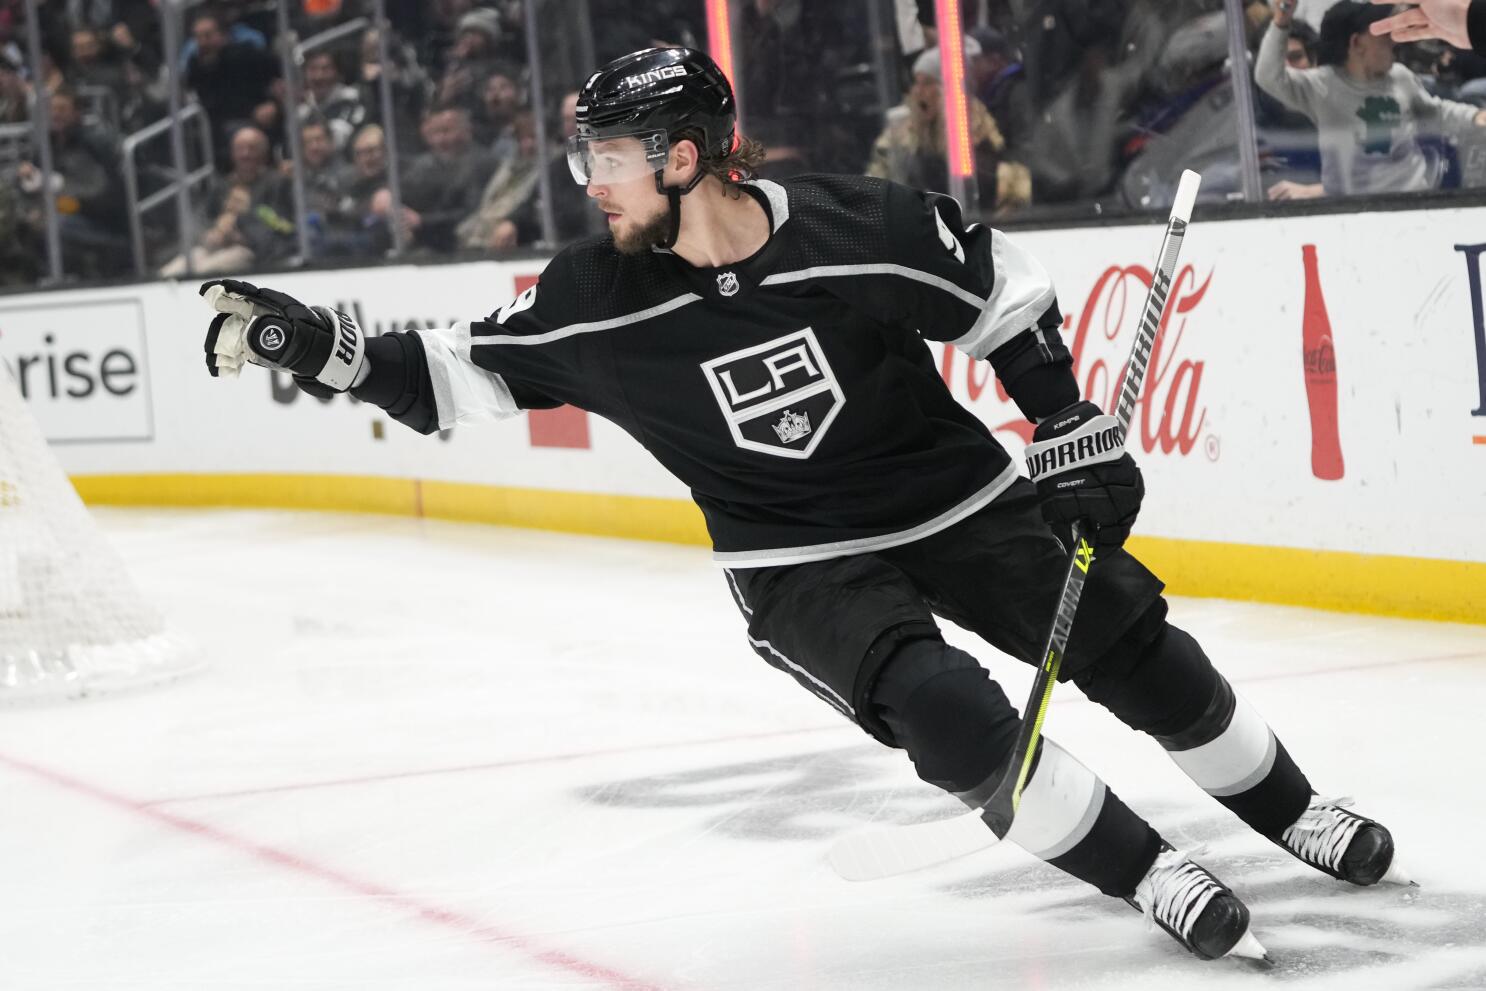 Adrian Kempe scored twice as the Kings netted seven goals in a